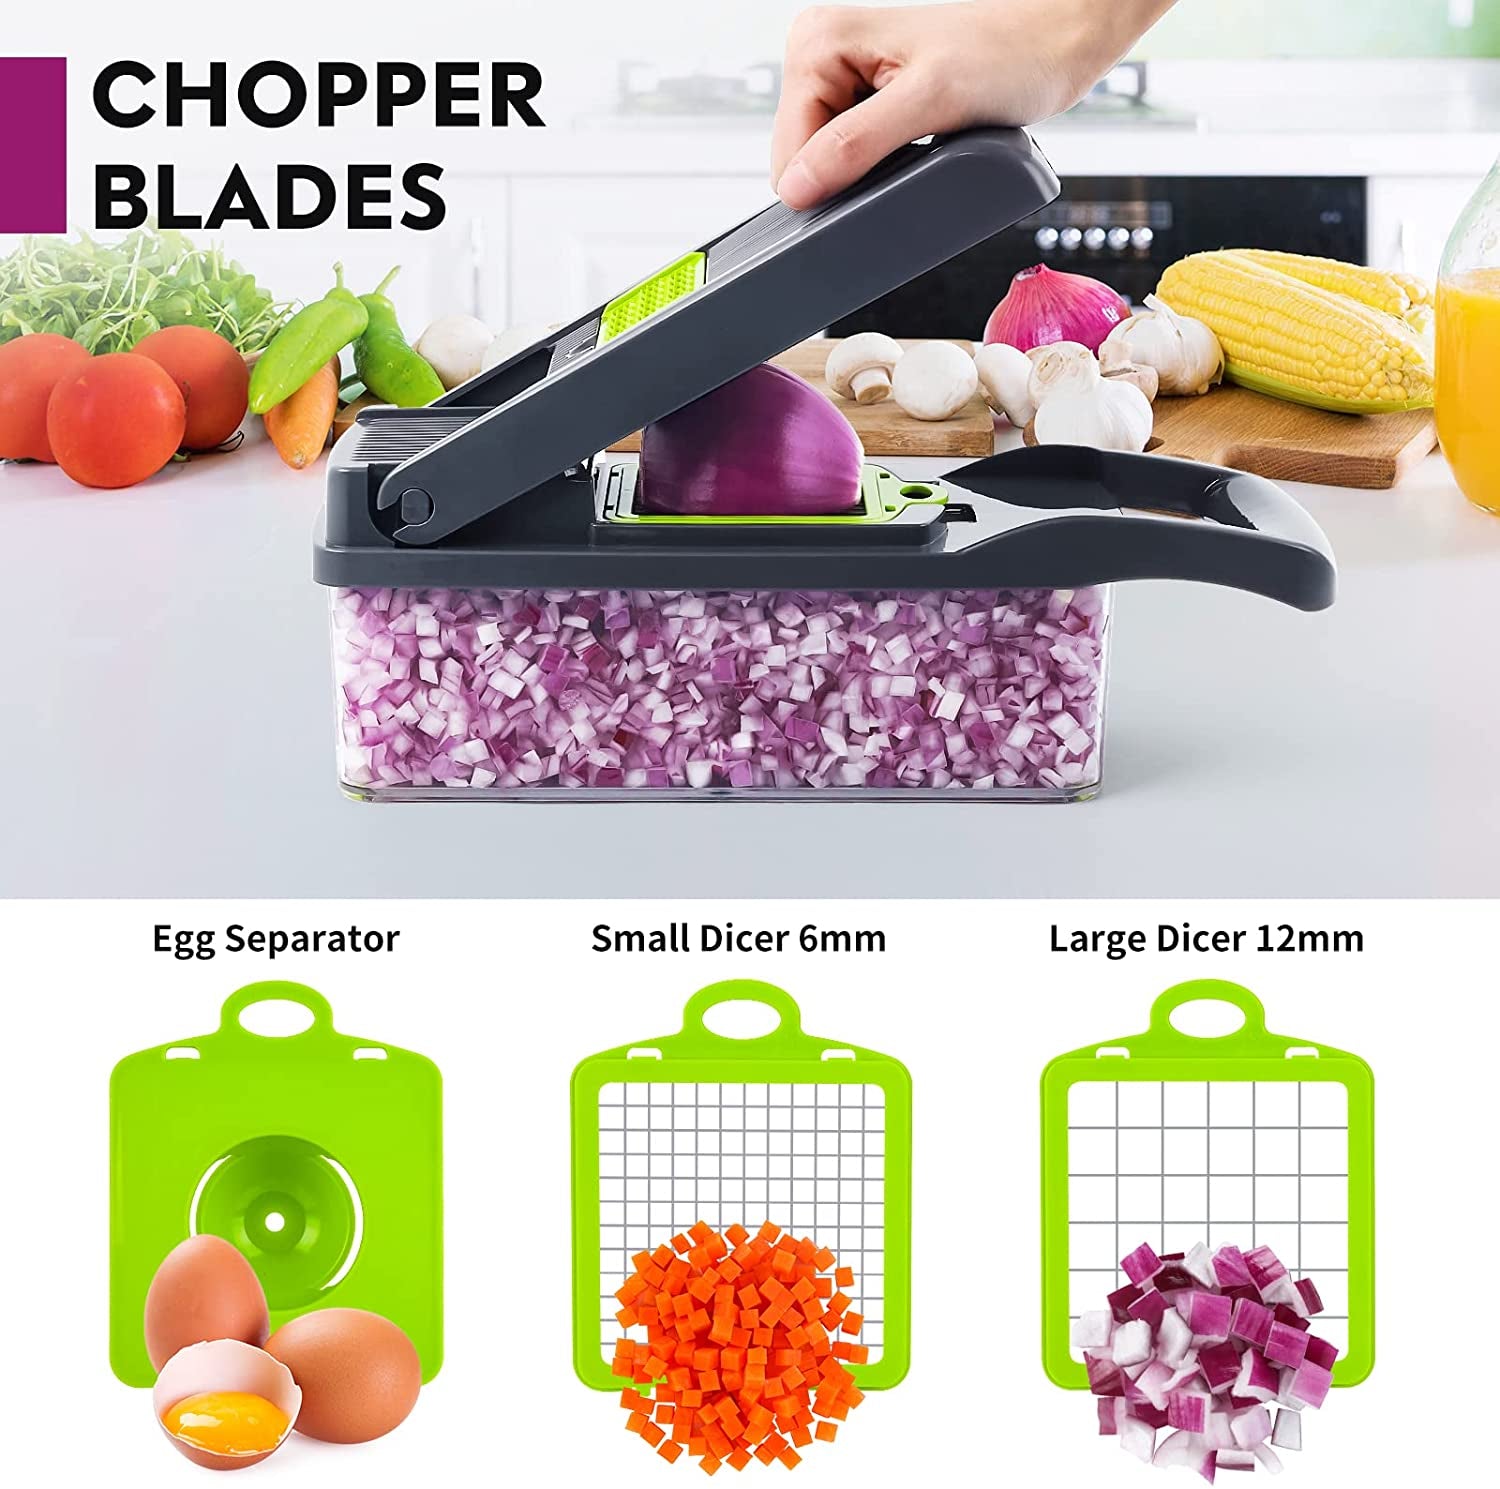 Vegetable Chopper, Pro Onion Chopper, Multifunctional 13 in 1 Food Chopper, Kitchen Vegetable Slicer Dicer Cutter,Veggie Chopper with 8 Blades,Carrot and Garlic Chopper with Container (Gray)